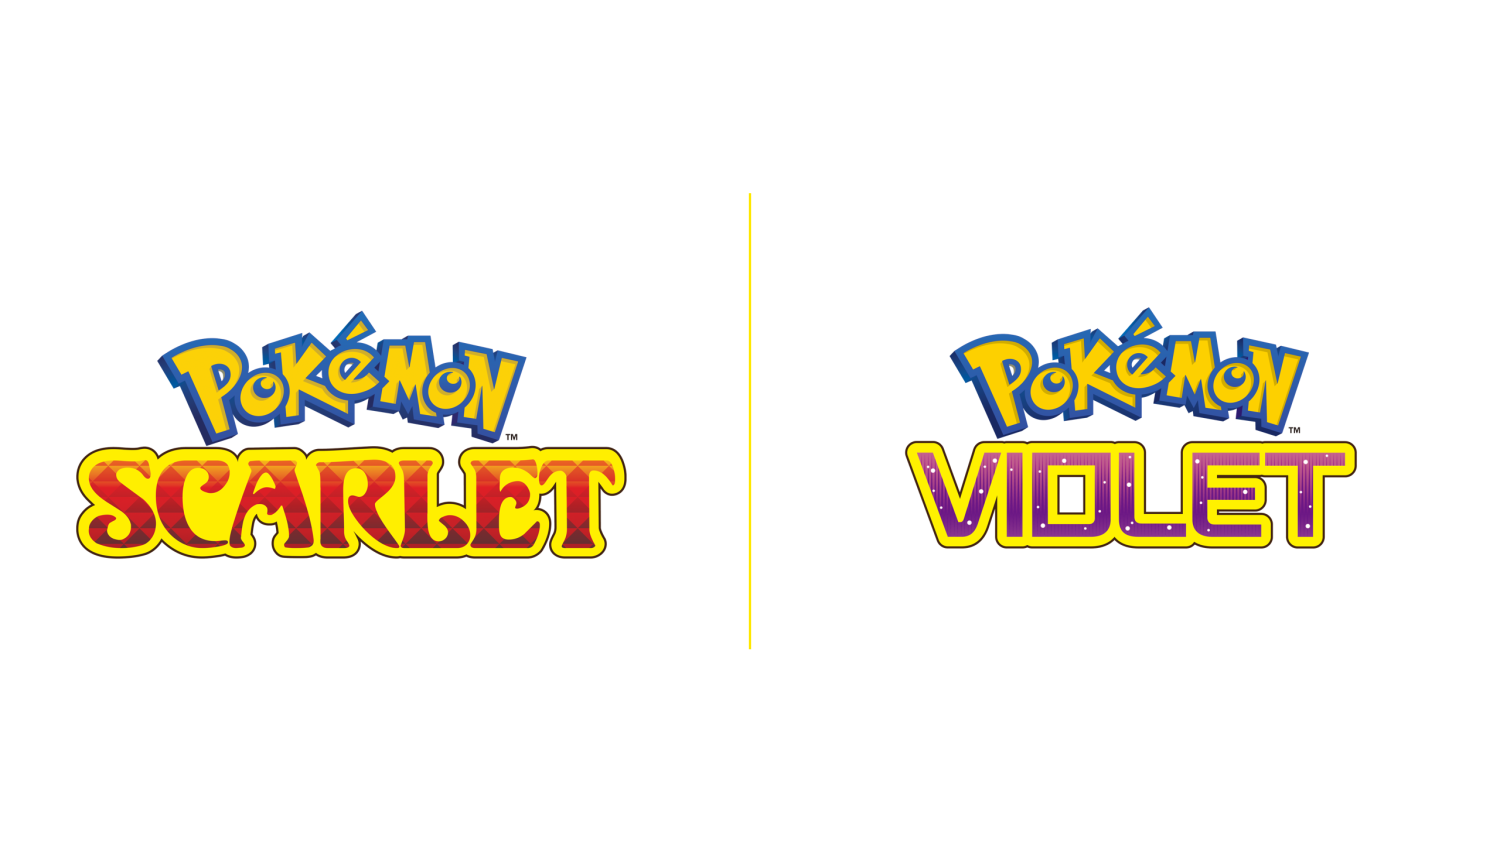 New Pokemon Scarlet and Violet will supercharge Nintendo's 2022 | Pokemart